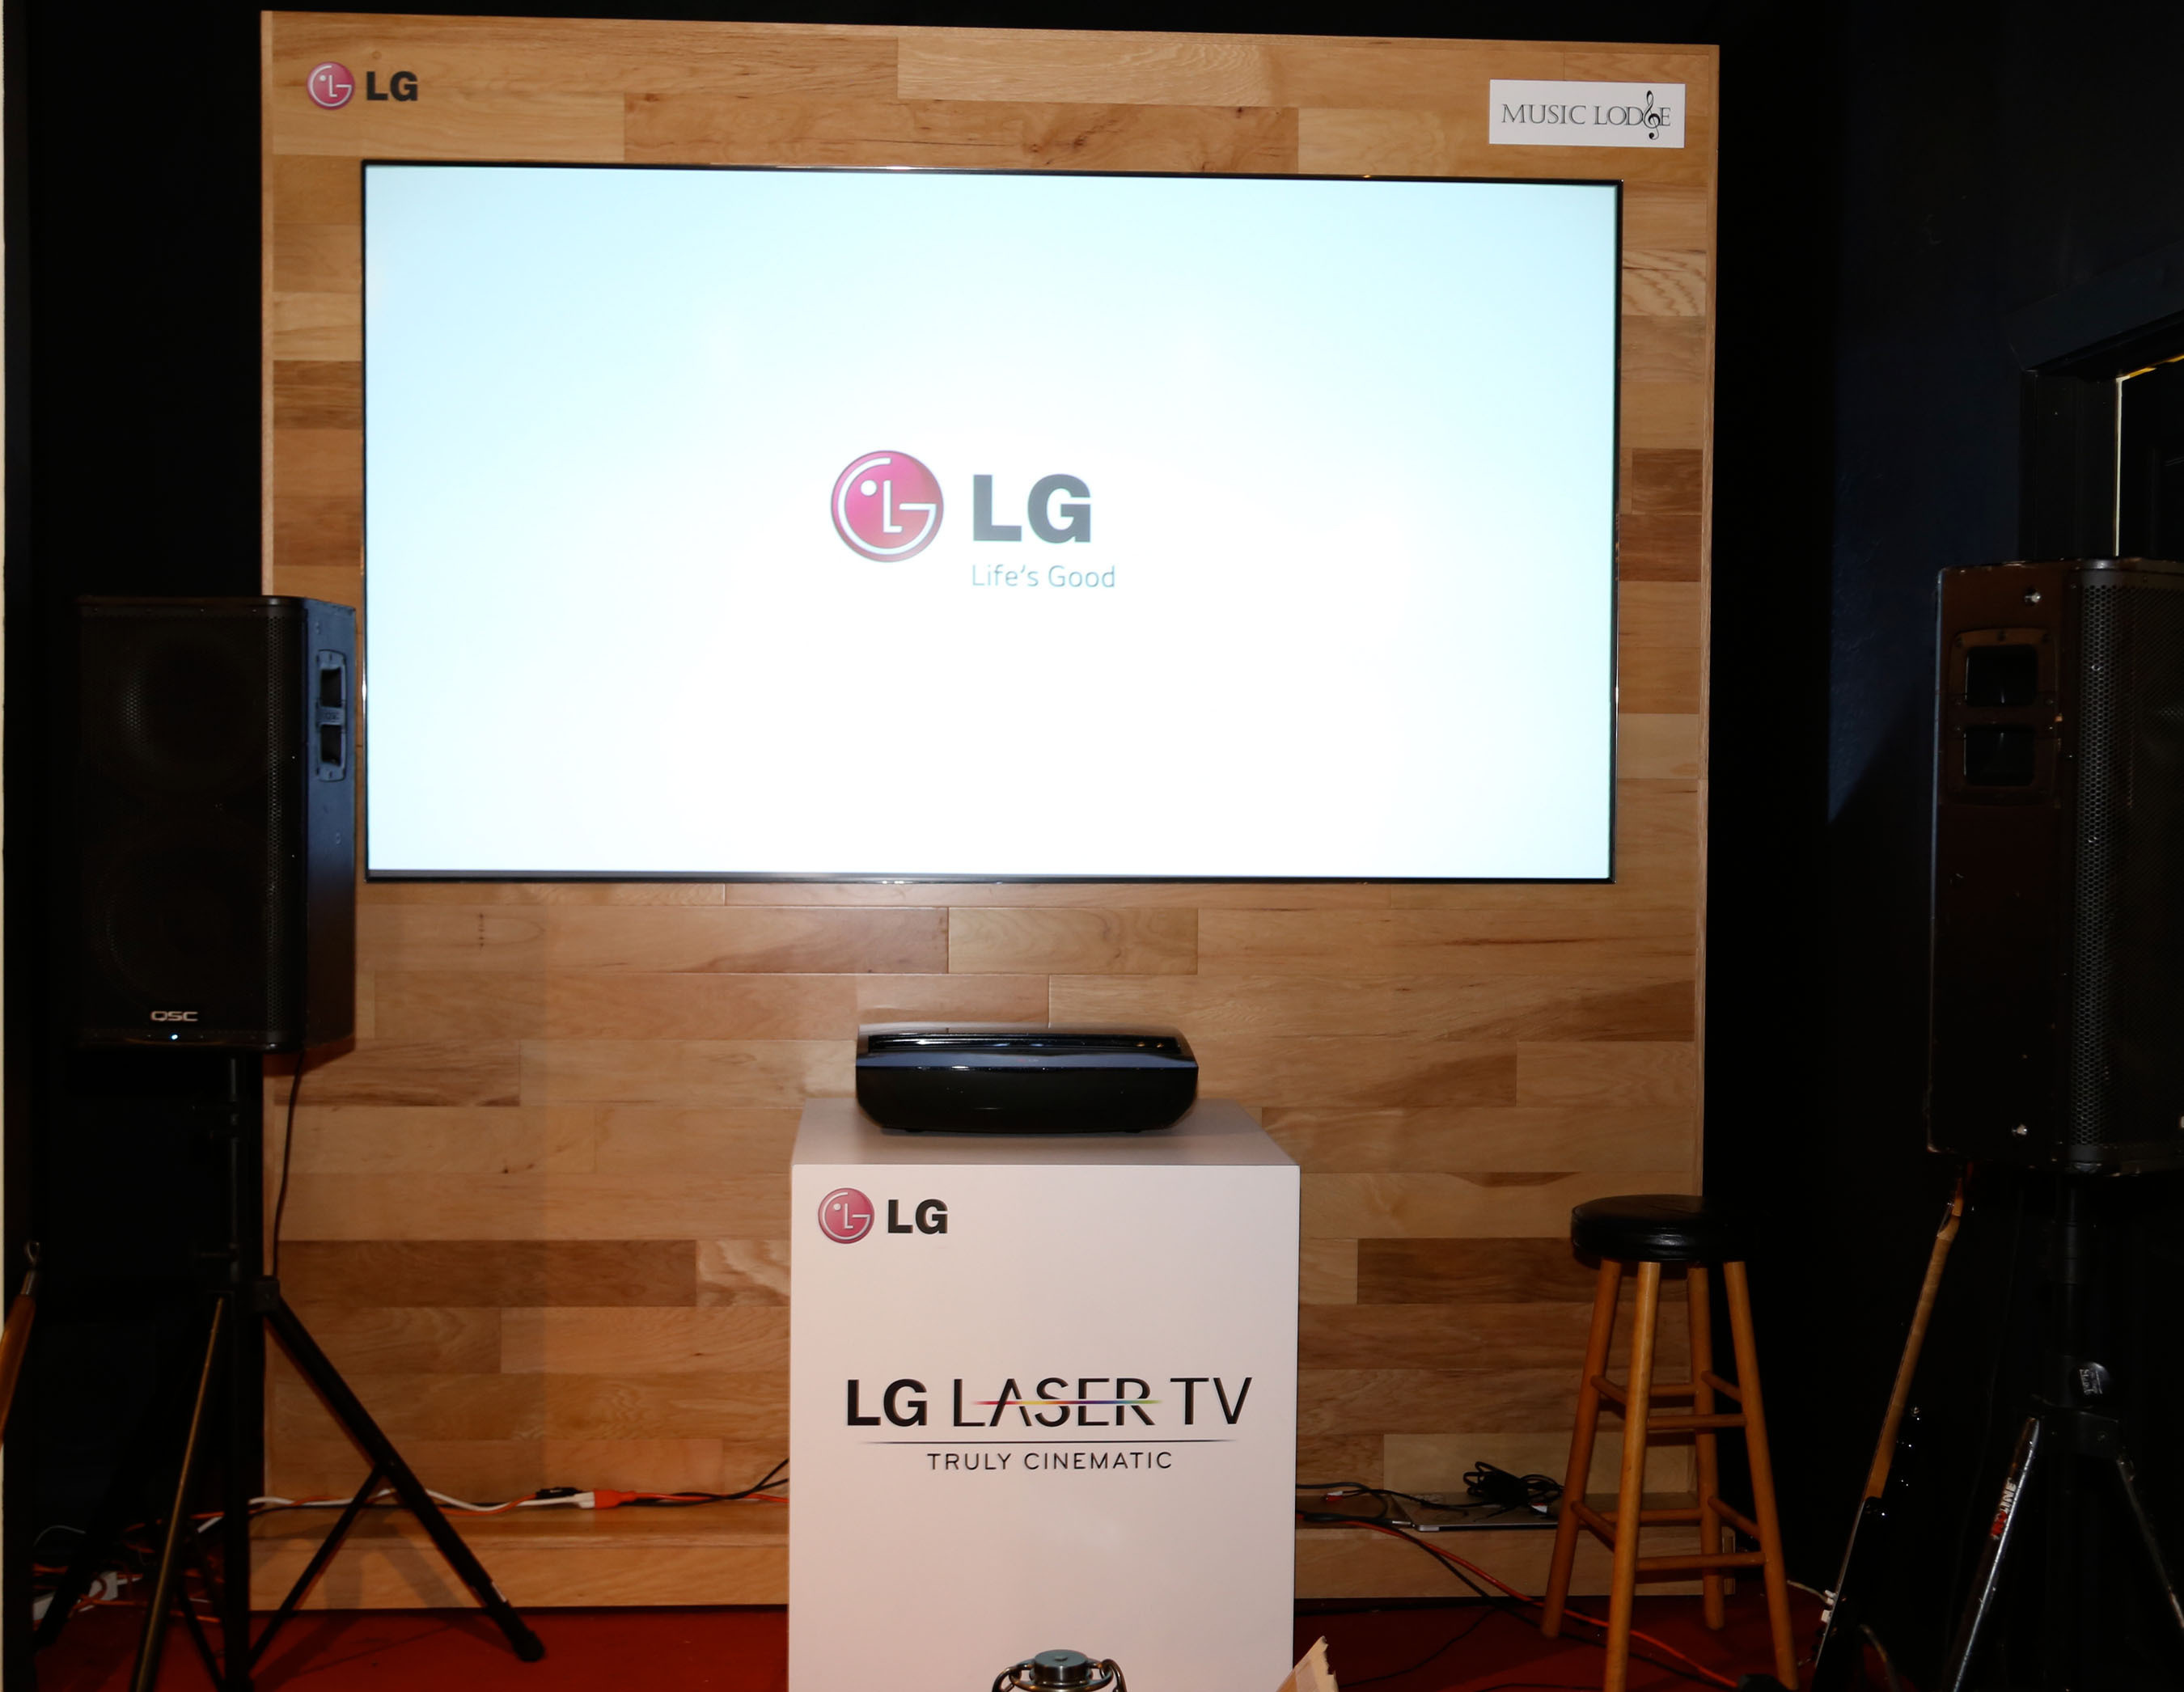 VIP guests will watch football playoff action on LG's 100-inch Laser TV at the LG Music Lodge at the Sundance Film Festival on Sunday, January 19, 2014. (PRNewsFoto/LG Electronics USA, Inc.) (PRNewsFoto/LG ELECTRONICS USA, INC.)